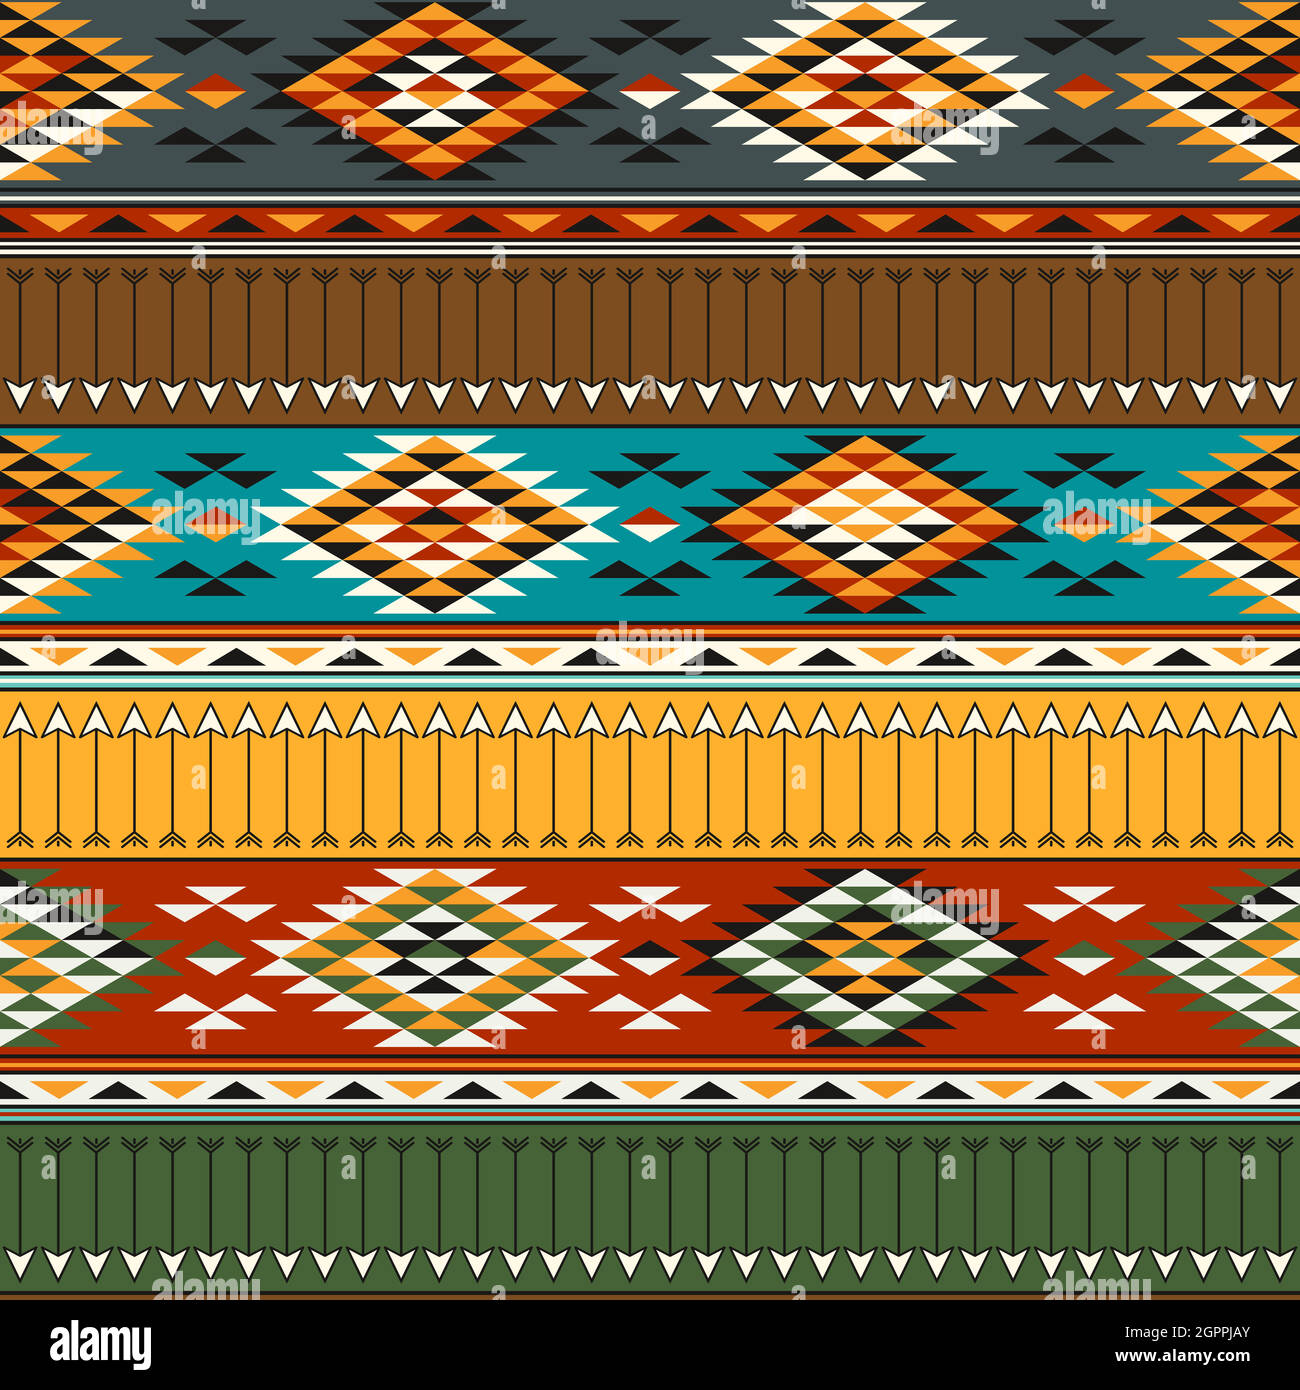 American Indian embroidery pattern Stock Vector